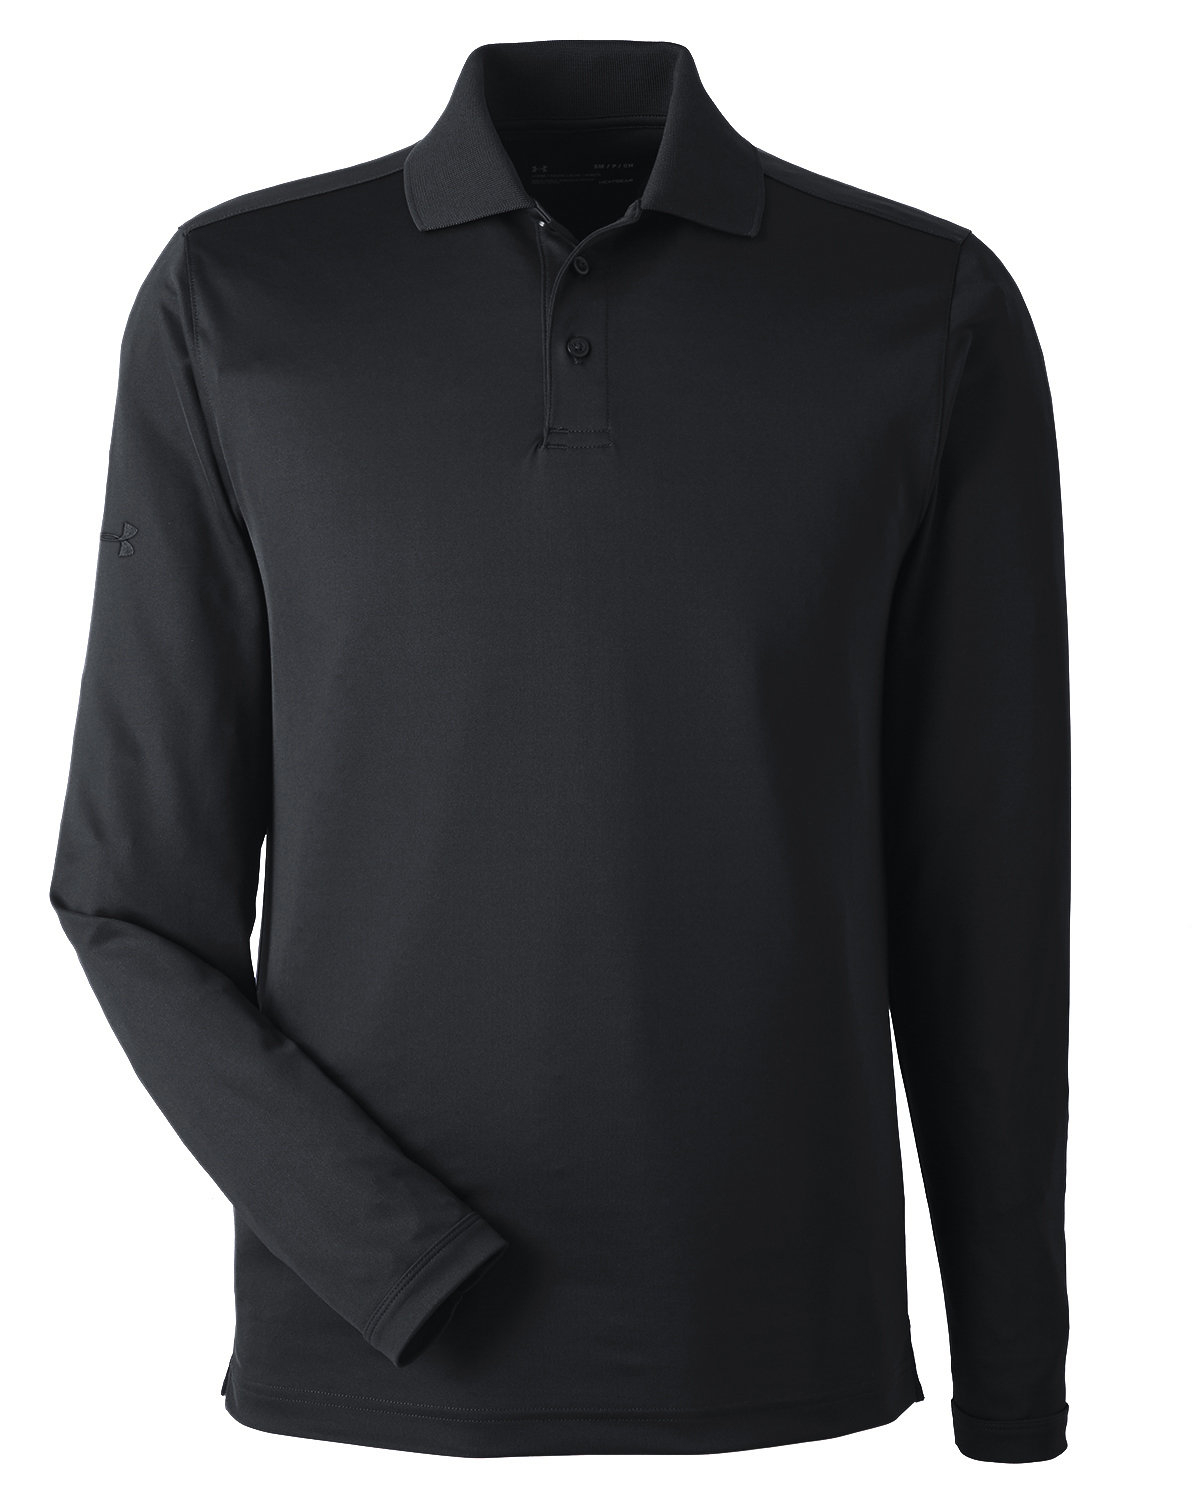 Under Armour 1343090 - Mens Corporate Long-Sleeve Performance Polo $42.90